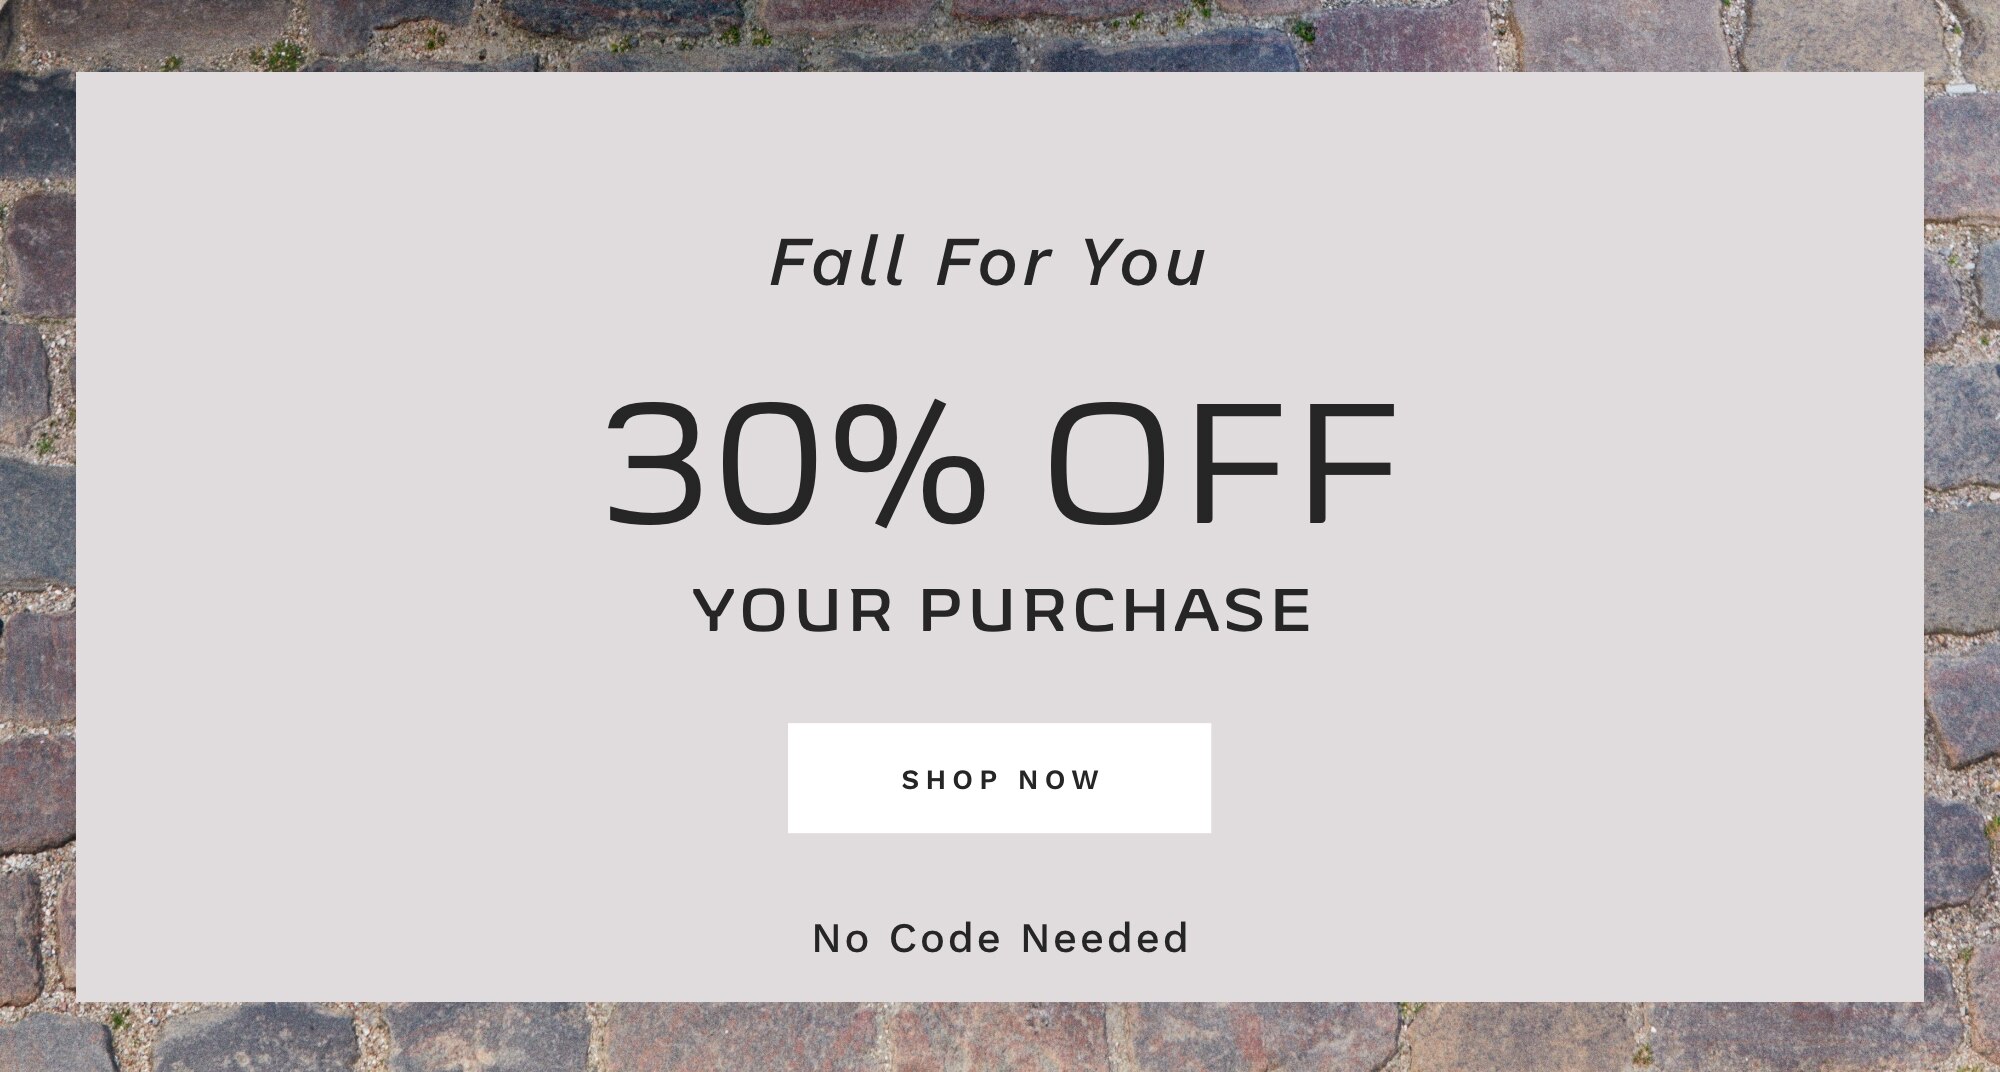 FALL FOR YOU 30% OFF YOUR PURCHASE SHOP NOW No Code Needed